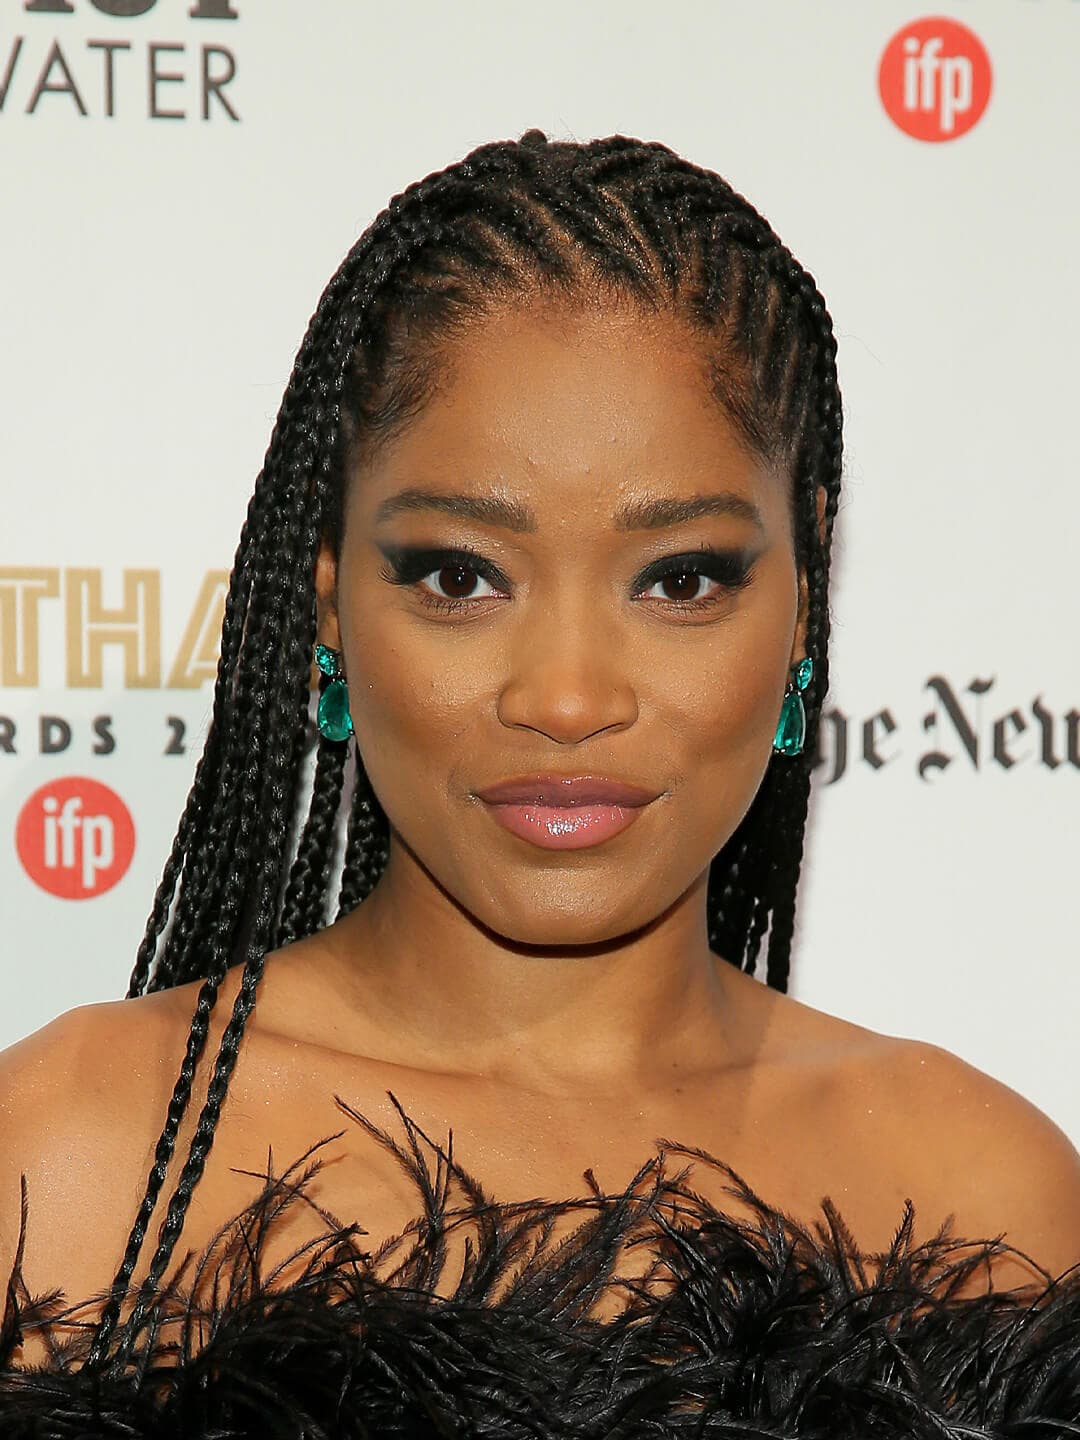 Keke Palmer rocking a black, feathery dress and braided hairstyle